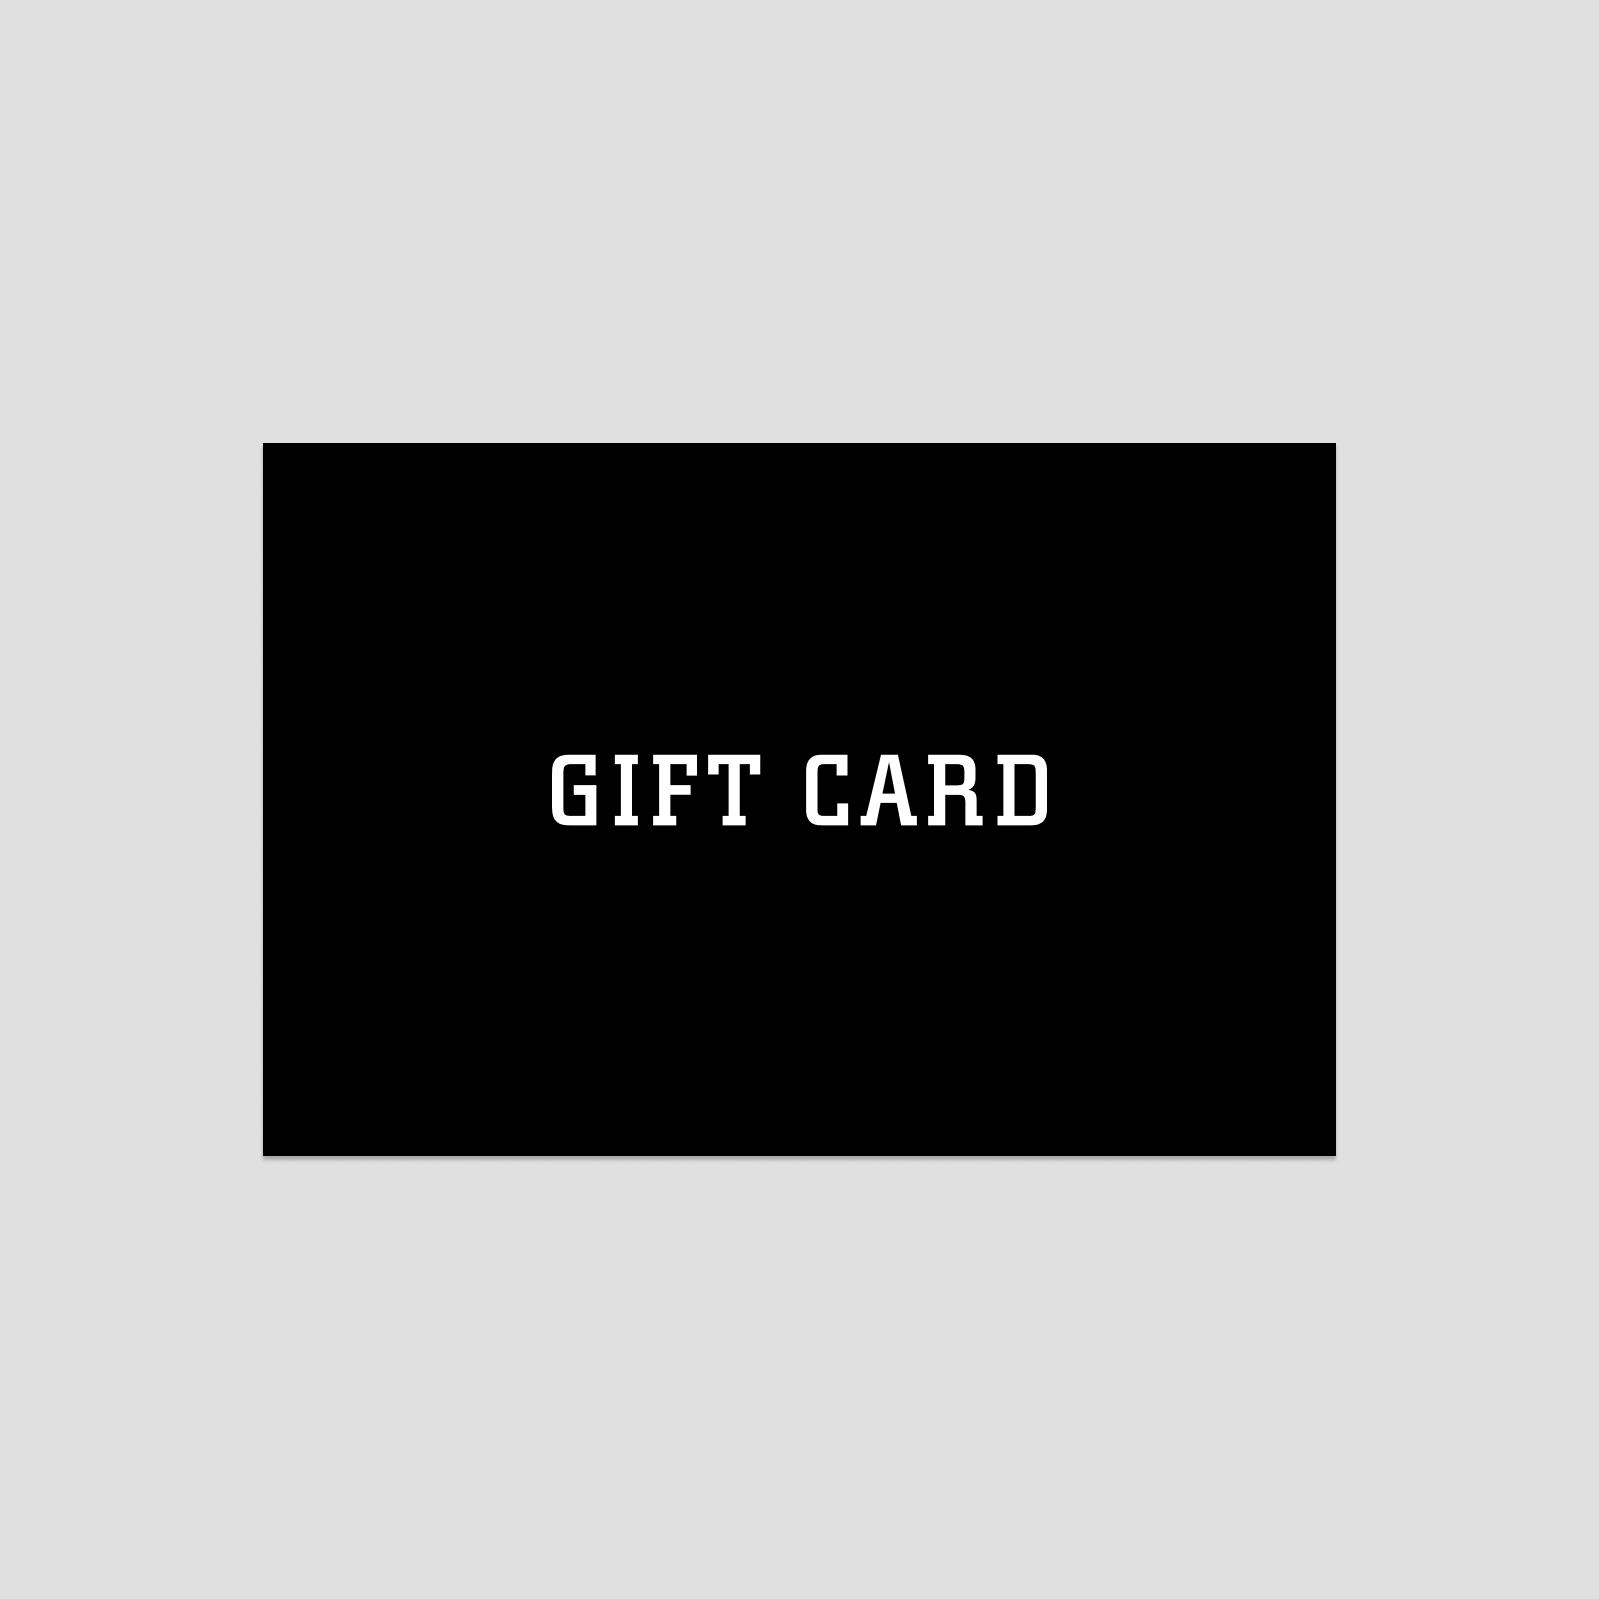 Gift card text, black square, this product is an e gift card, we do not offer physical cards